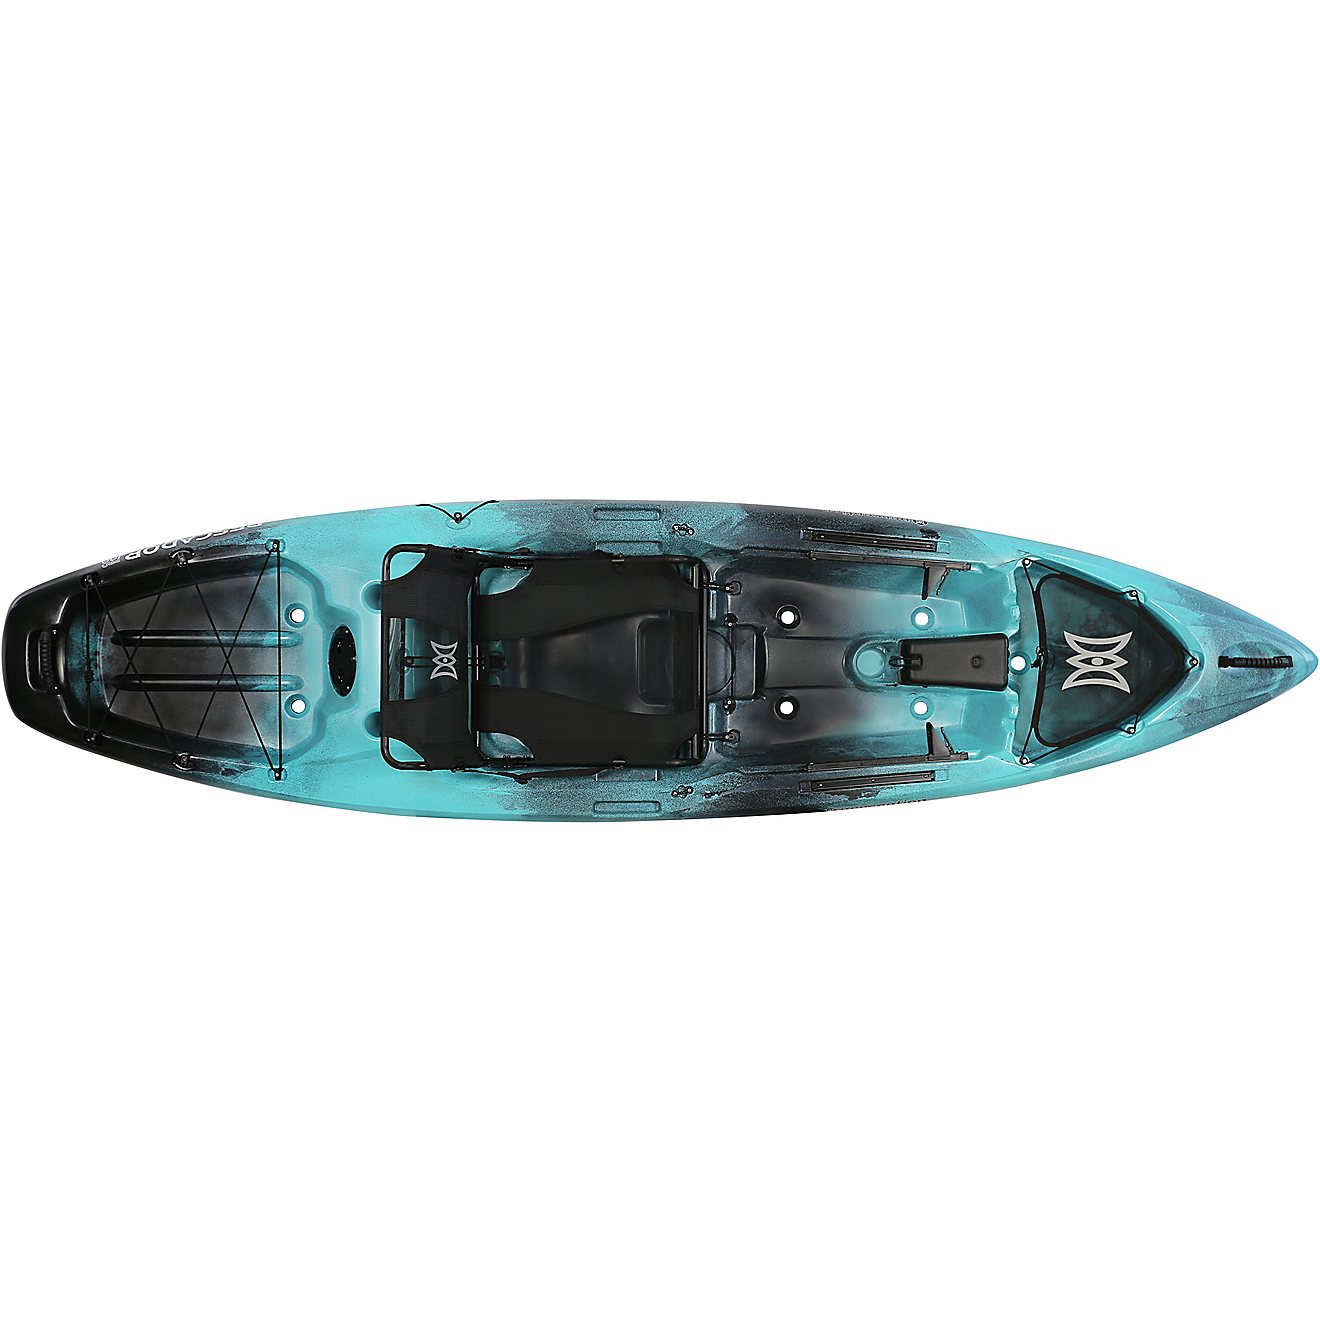 Perception Pescador Pro 10.5 ft Sit-On-Top Fishing Kayak                                                                         - view number 1